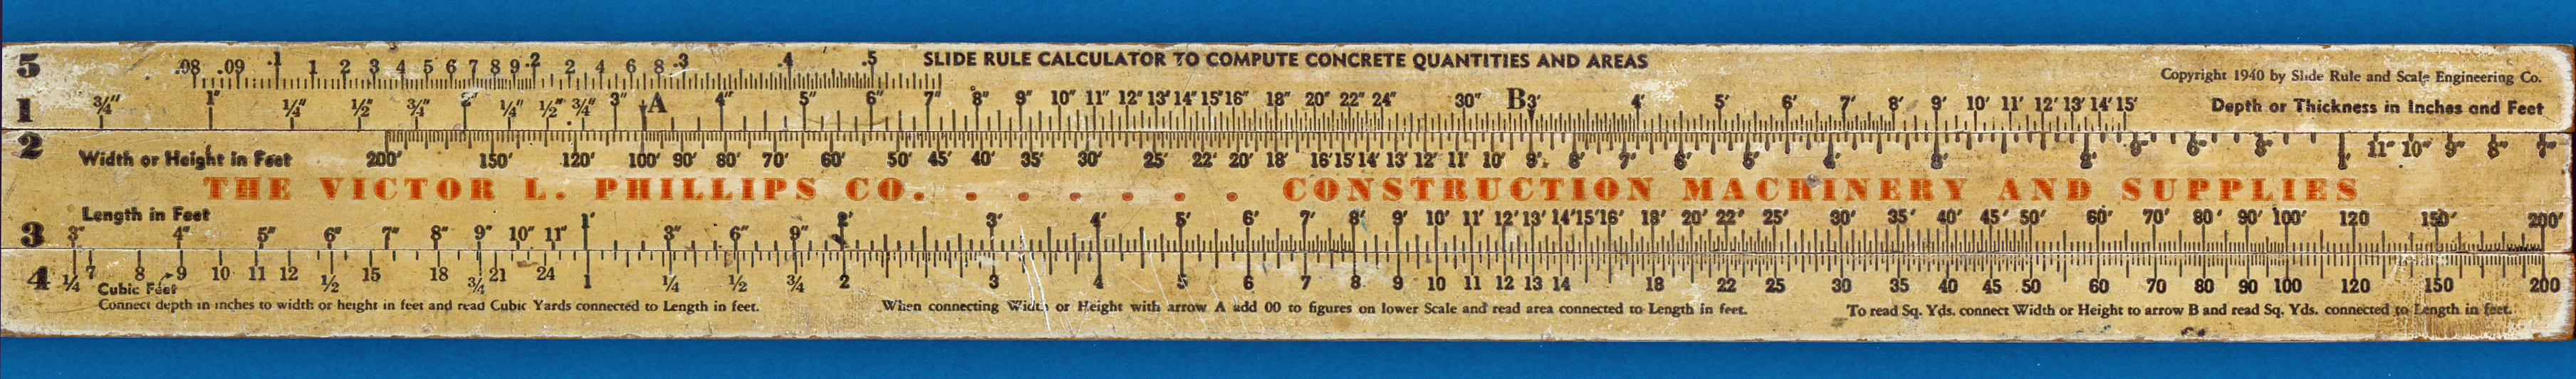 Slide Rule and Scale Engineering Co. Victor L. Phillips